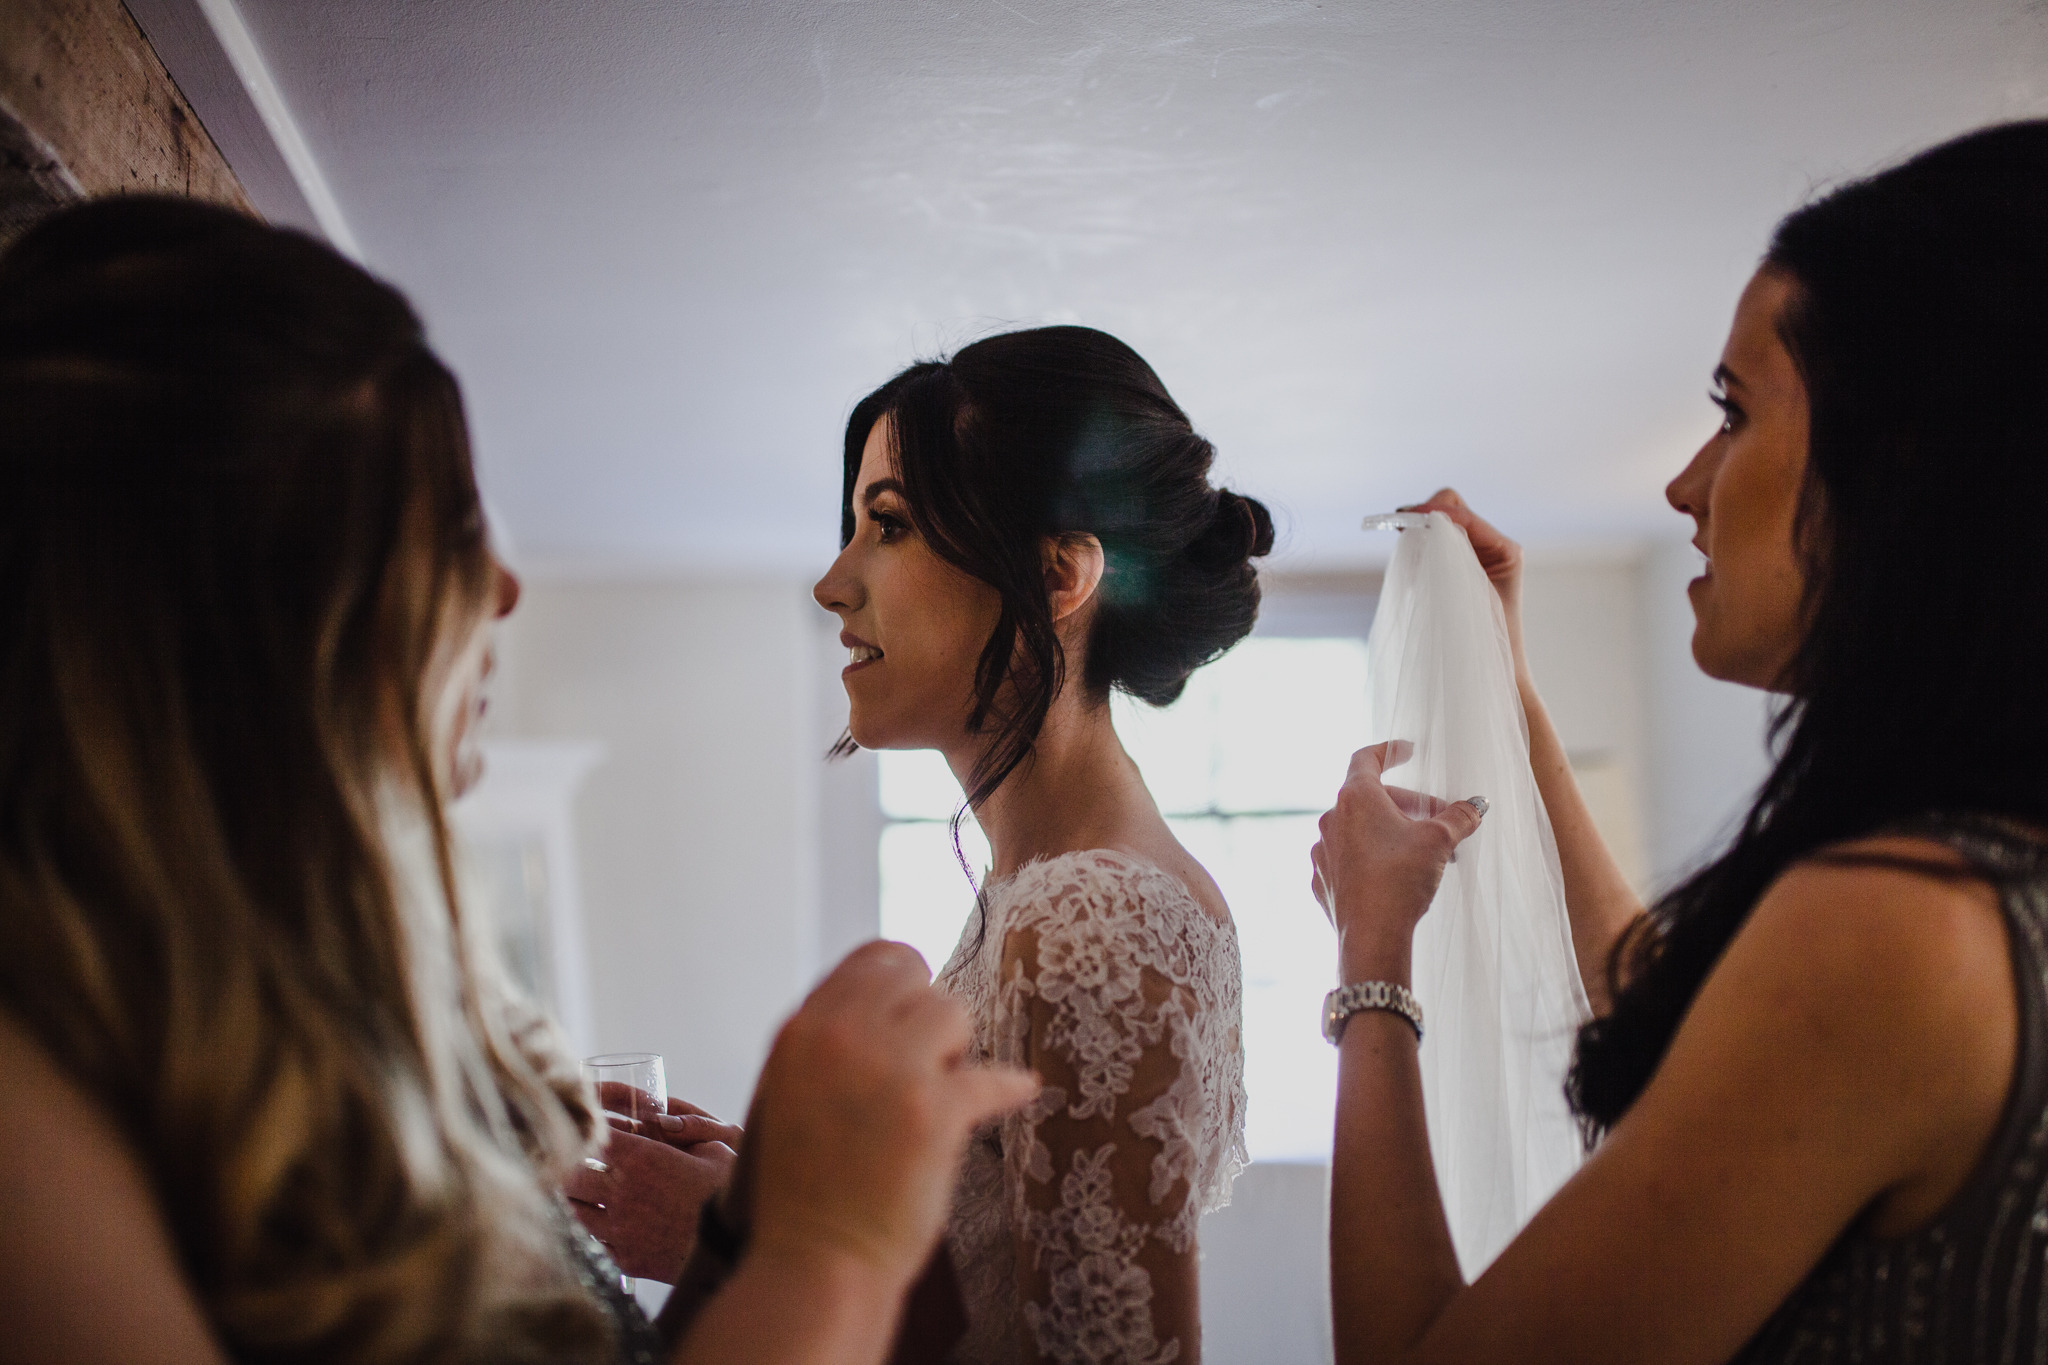 Maid of honor putting on the brides veil in hotel room